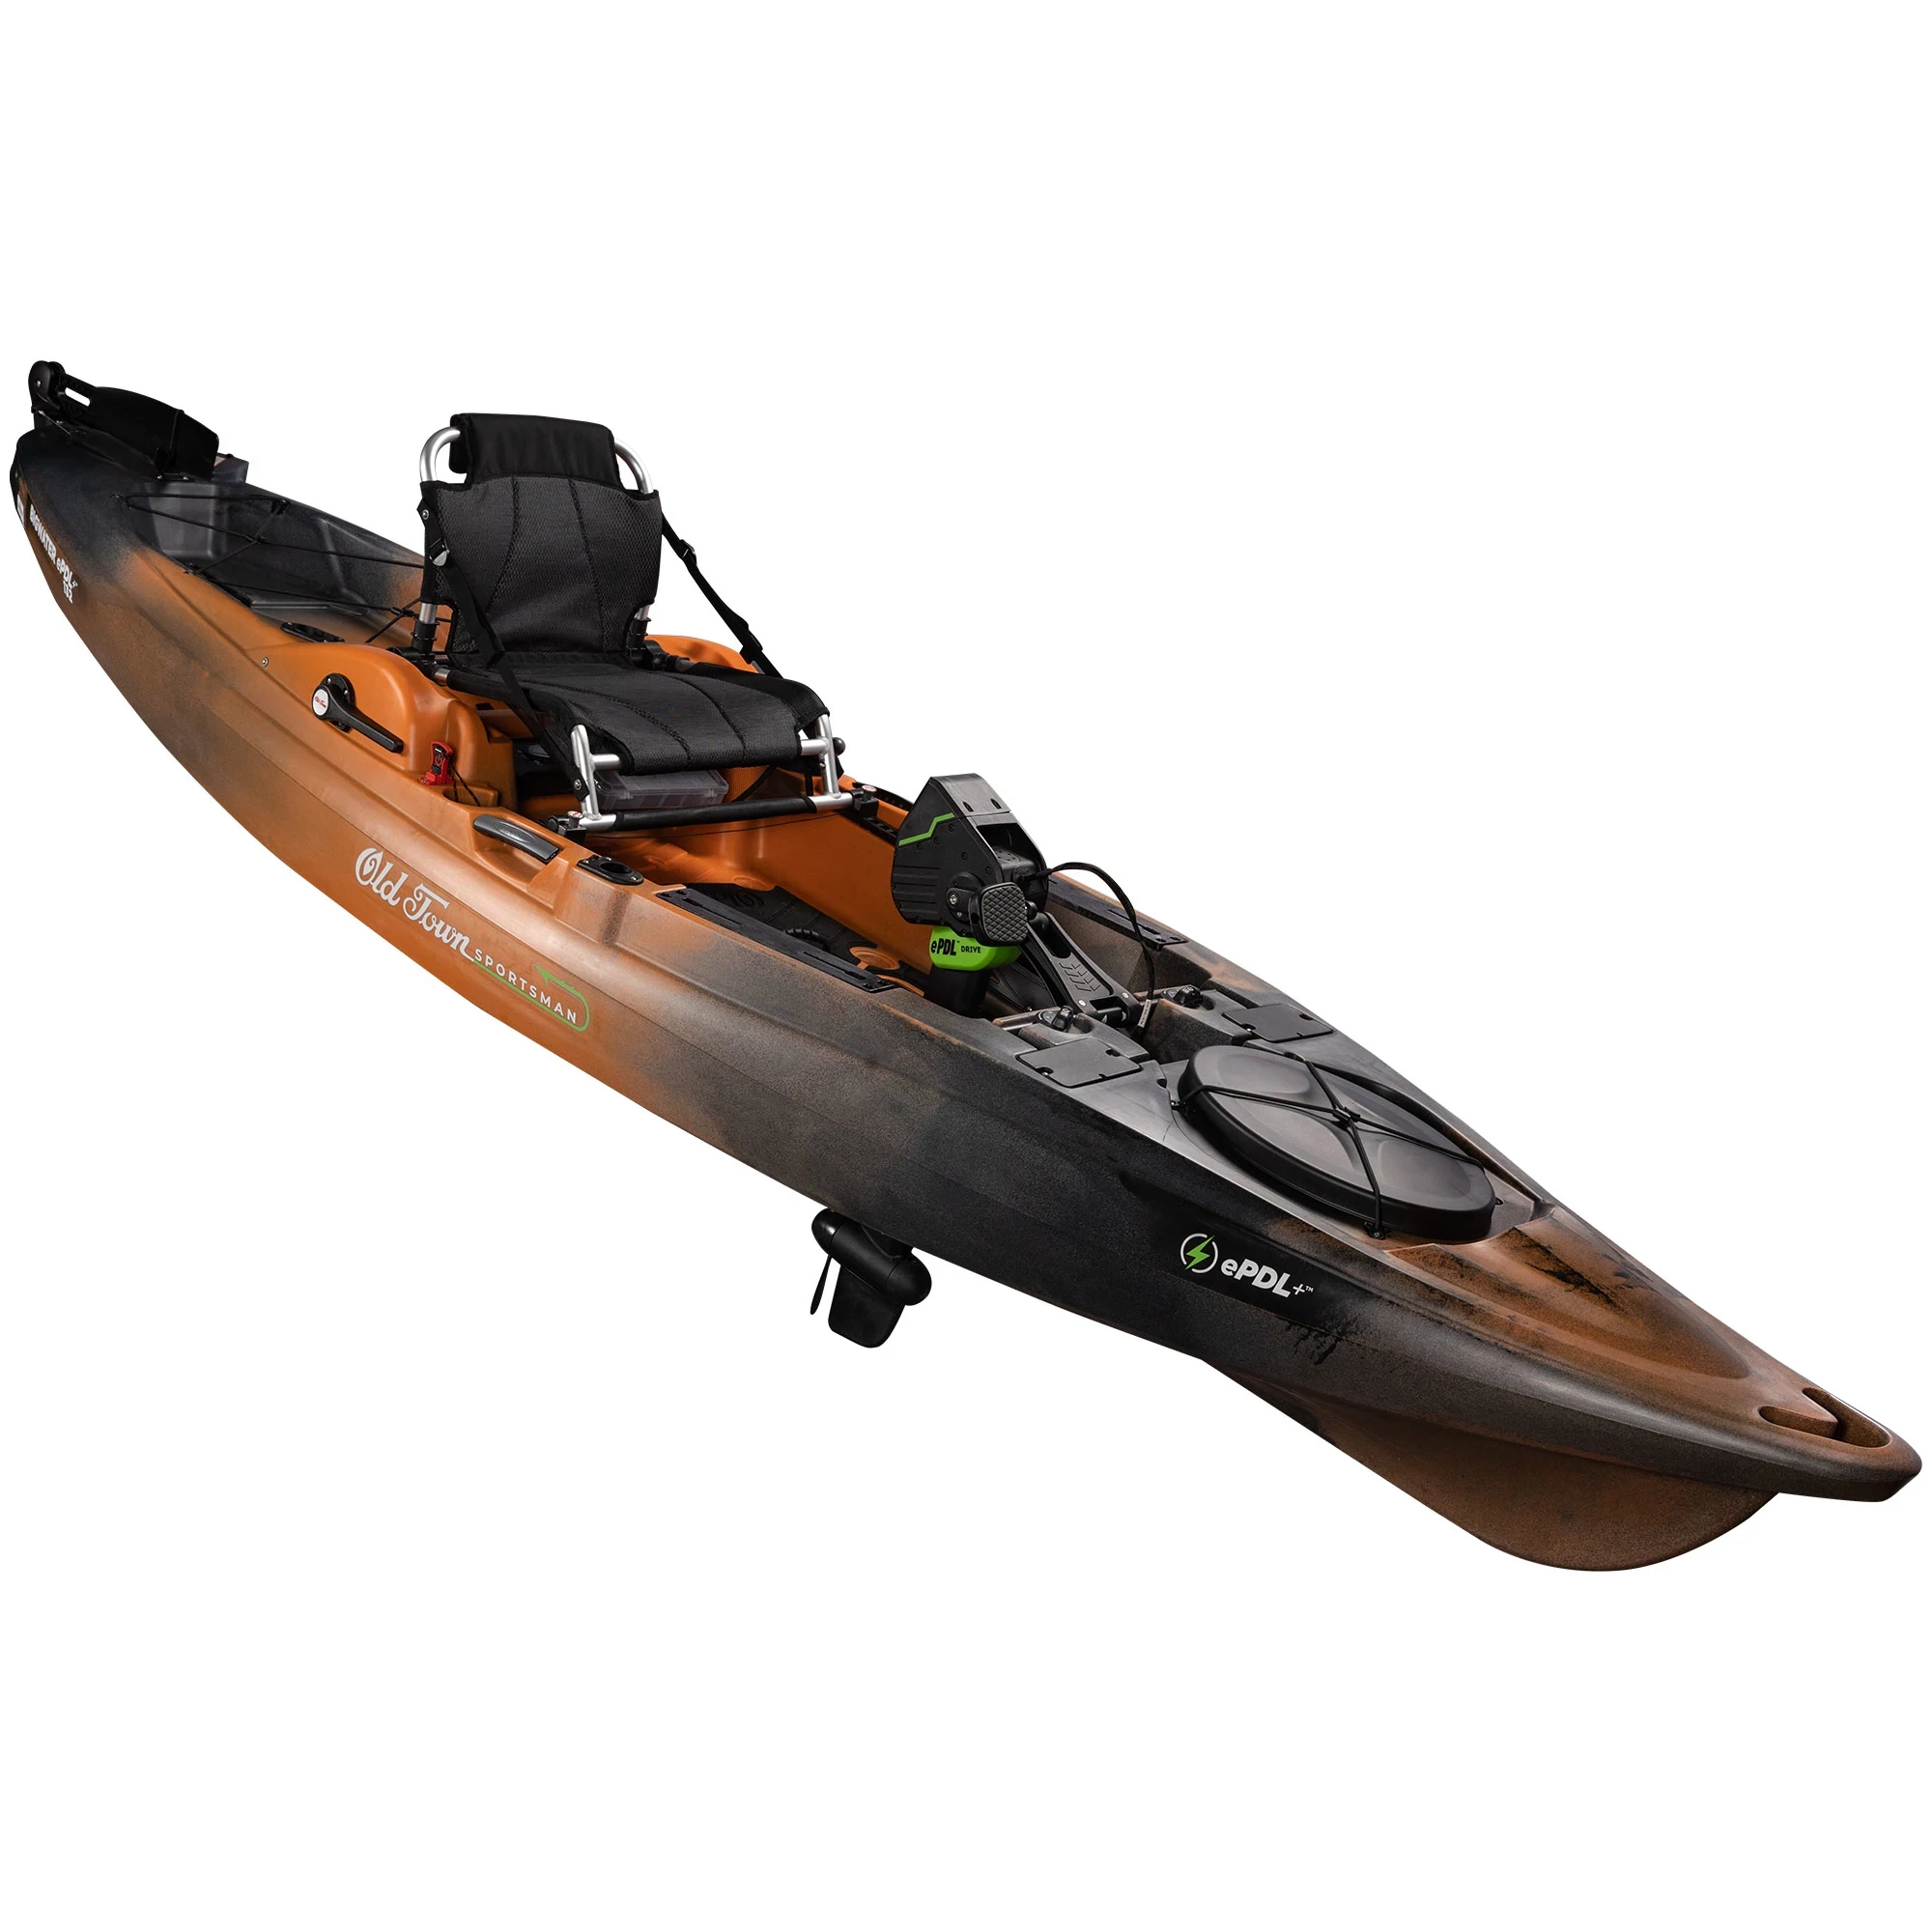 Angled View with Prop Down on Sportsman BigWater ePDL+ 132 - Ember Camo